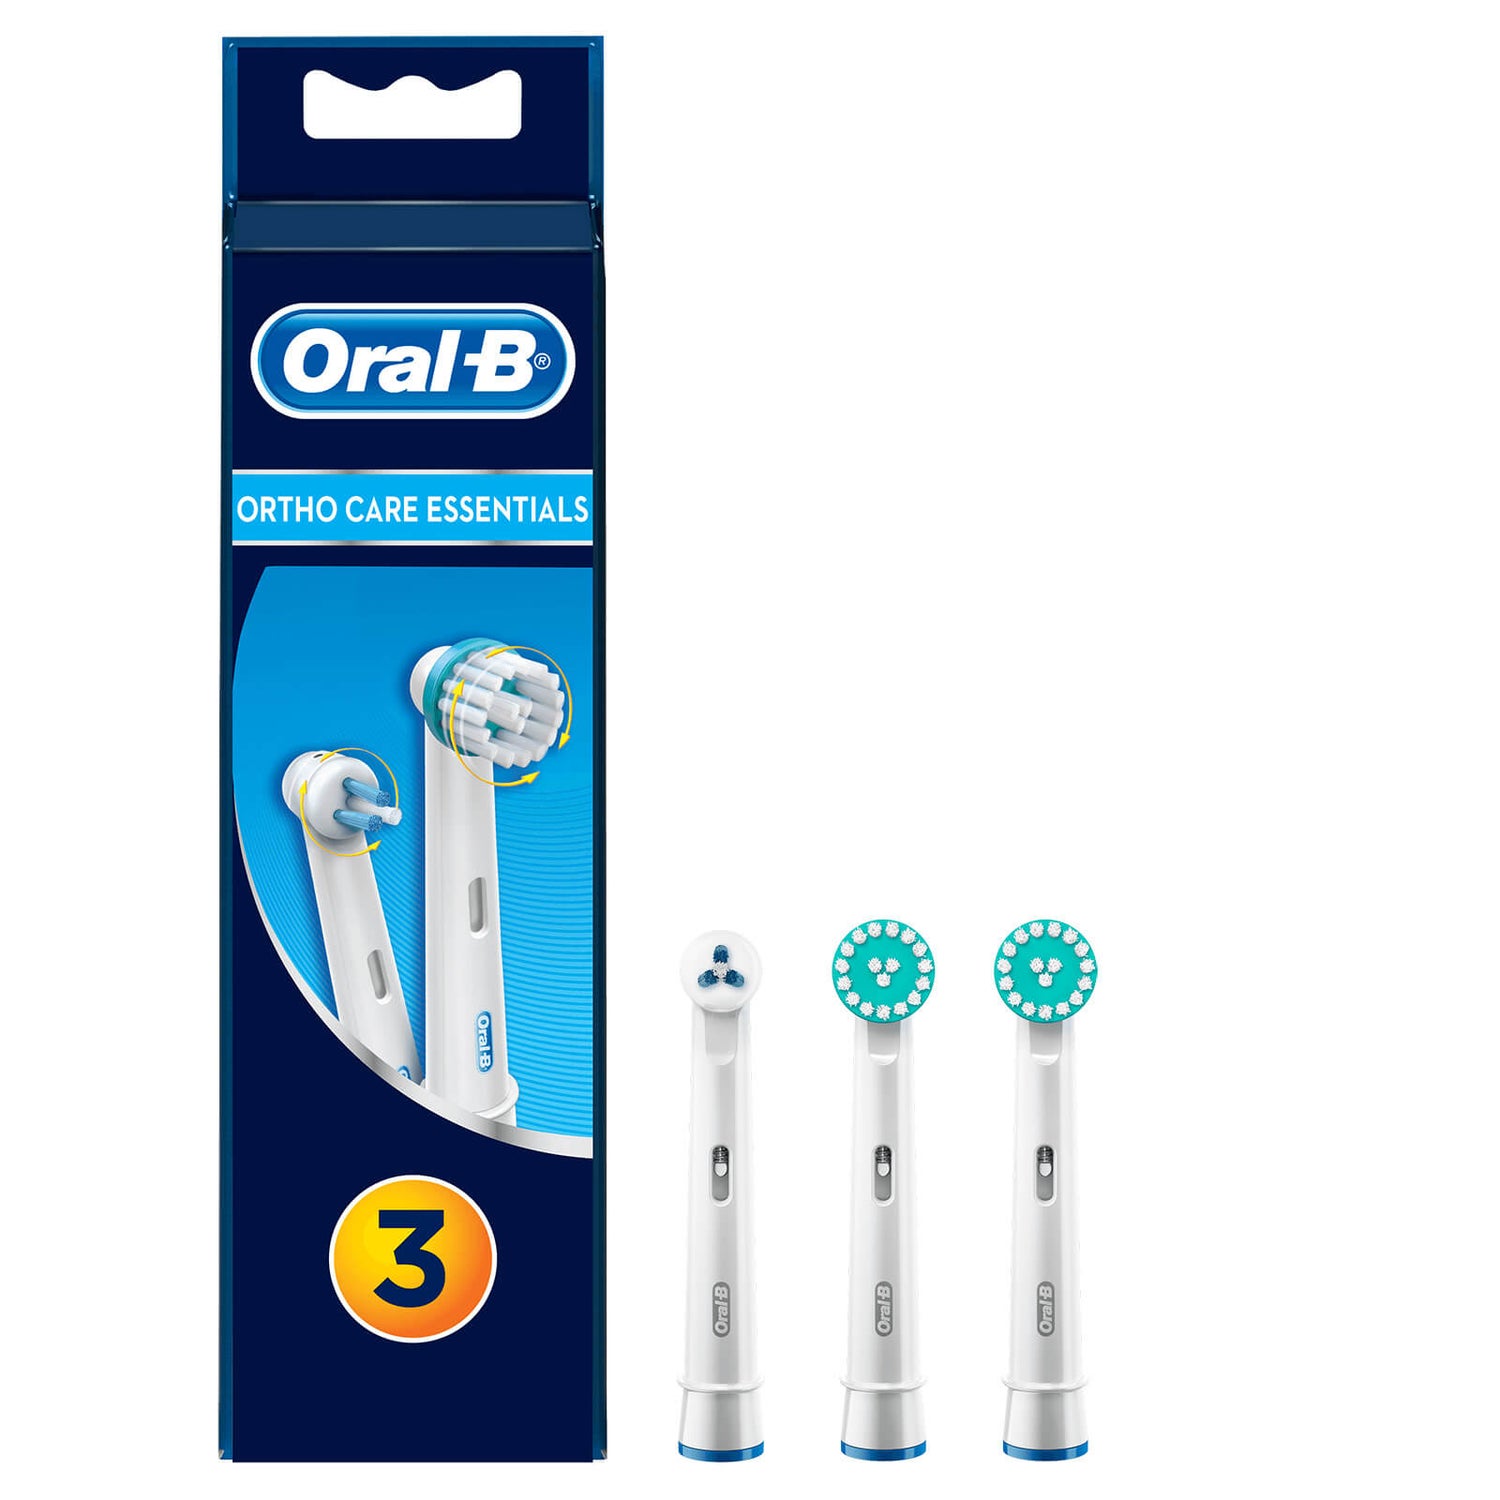 Oral B Ortho Care Essentials Replacement Toothbrush Heads (Pack of 3)